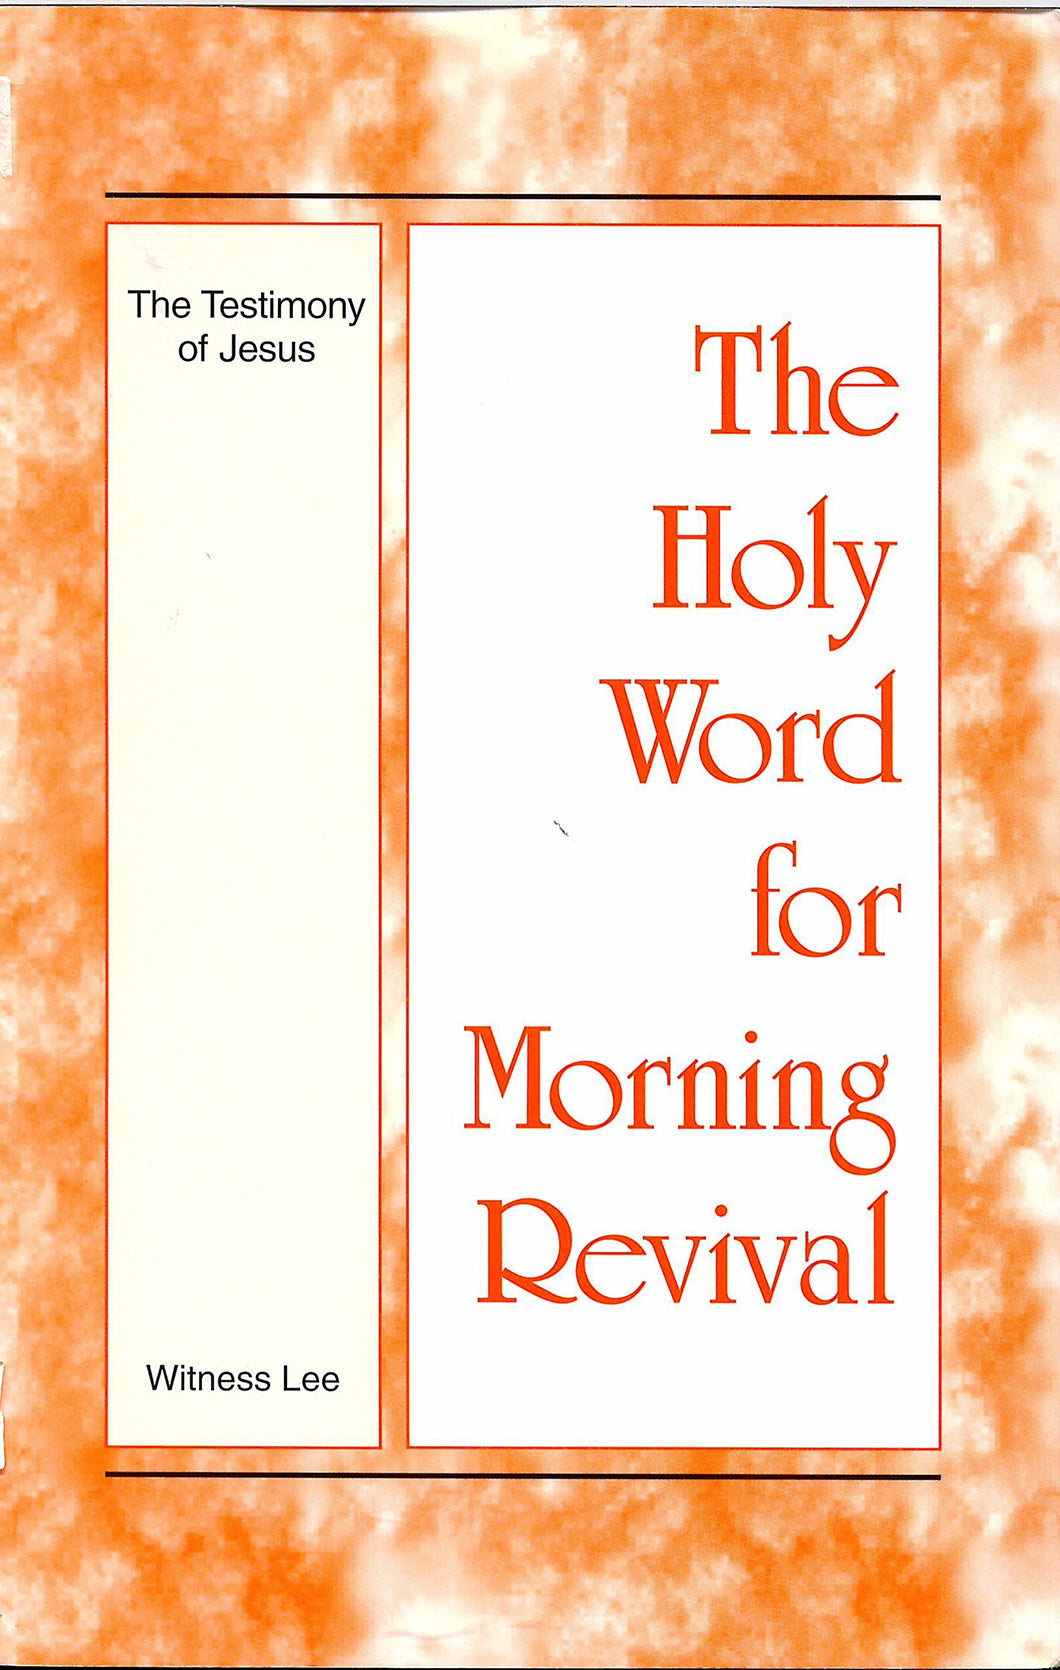 The Testimony of Jesus - The Holy Word for Morning Revival